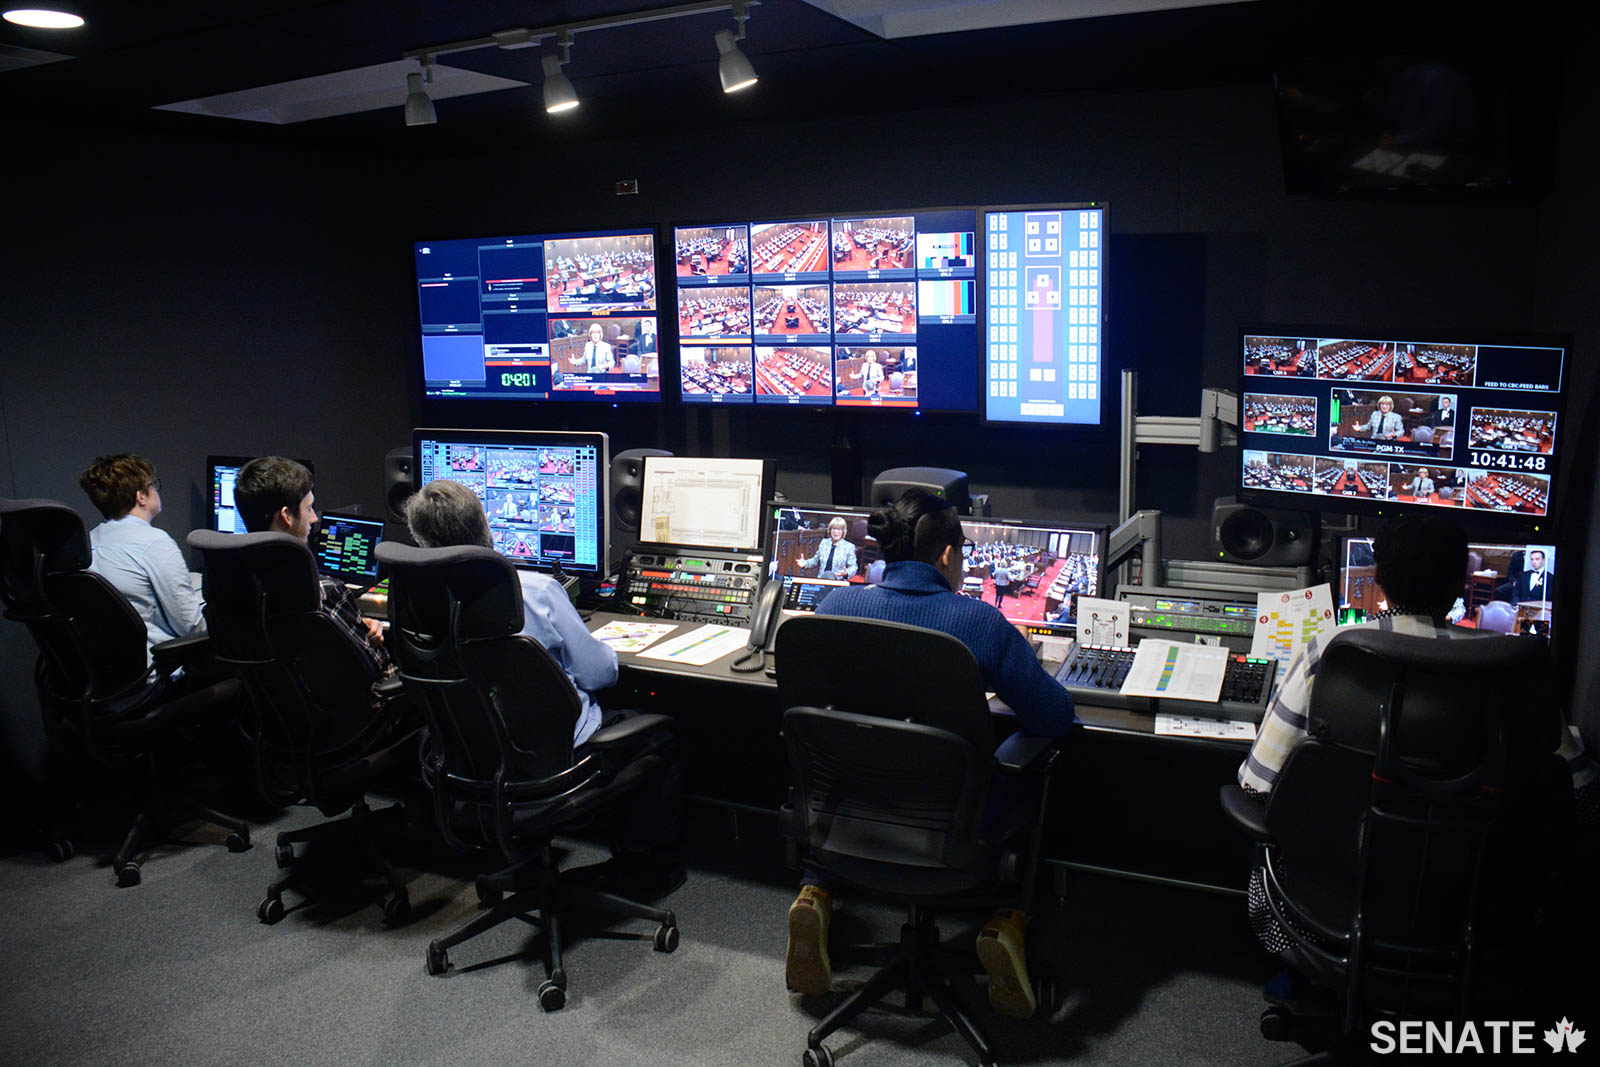 Students from La Cité collégiale and Algonquin College take command of an internal television feed in the Senate control room. The Senate began televising Chamber proceedings in February 2019.